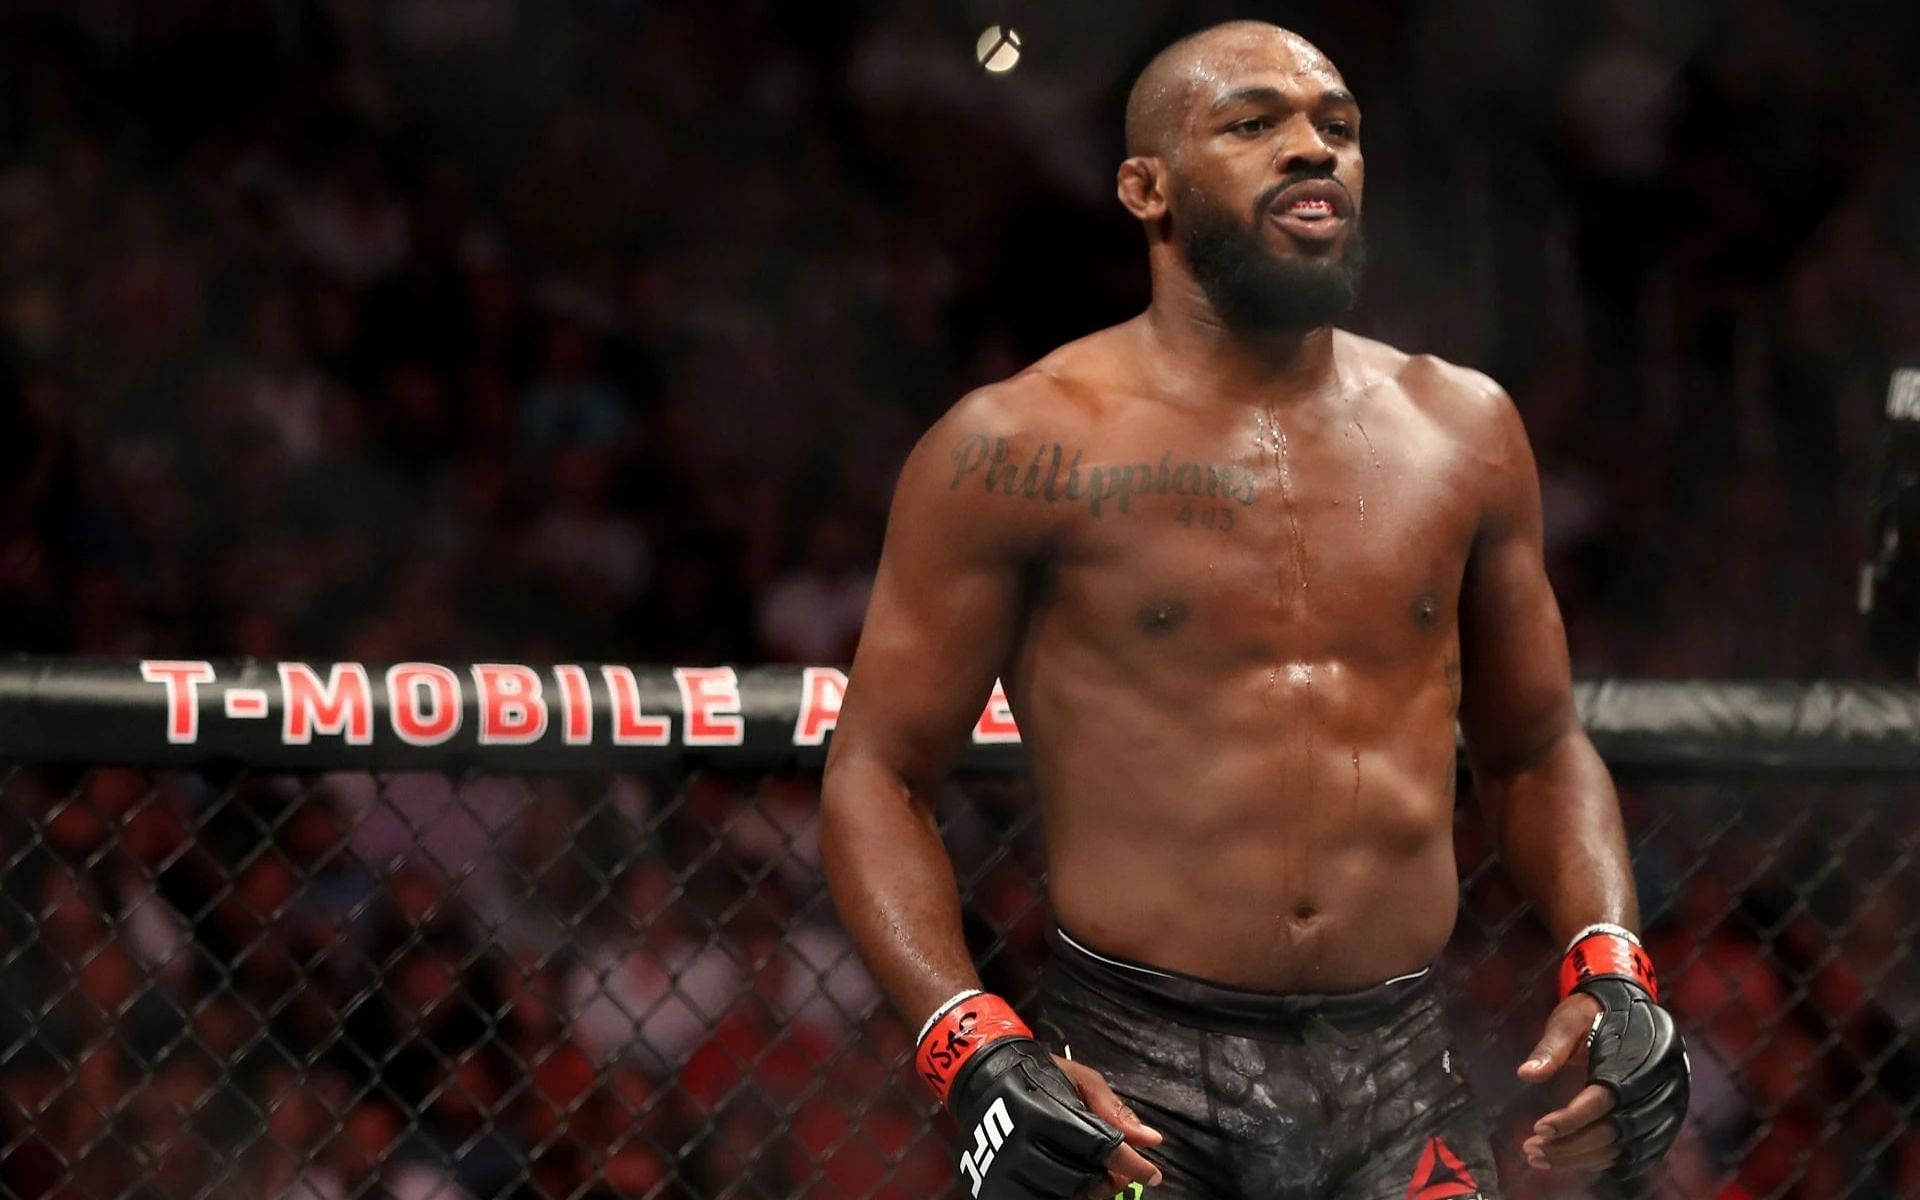 Jon Jones has proved his greatness in the UFC on more than one occasion